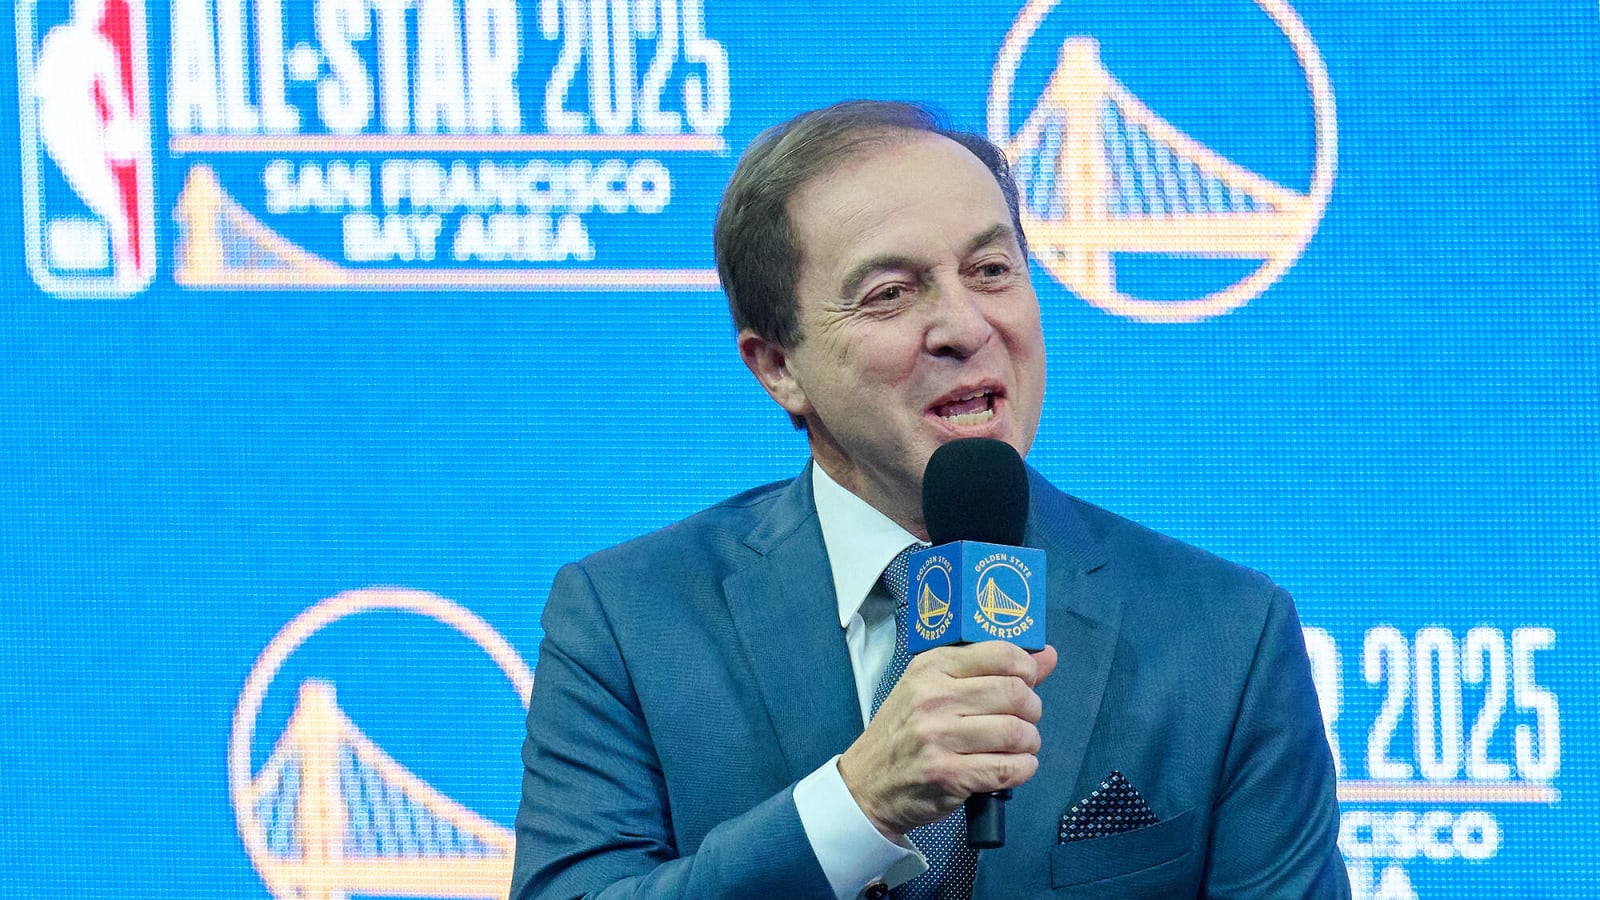 Warriors Owner Joe Lacob expressed interest in acquiring LeBron James